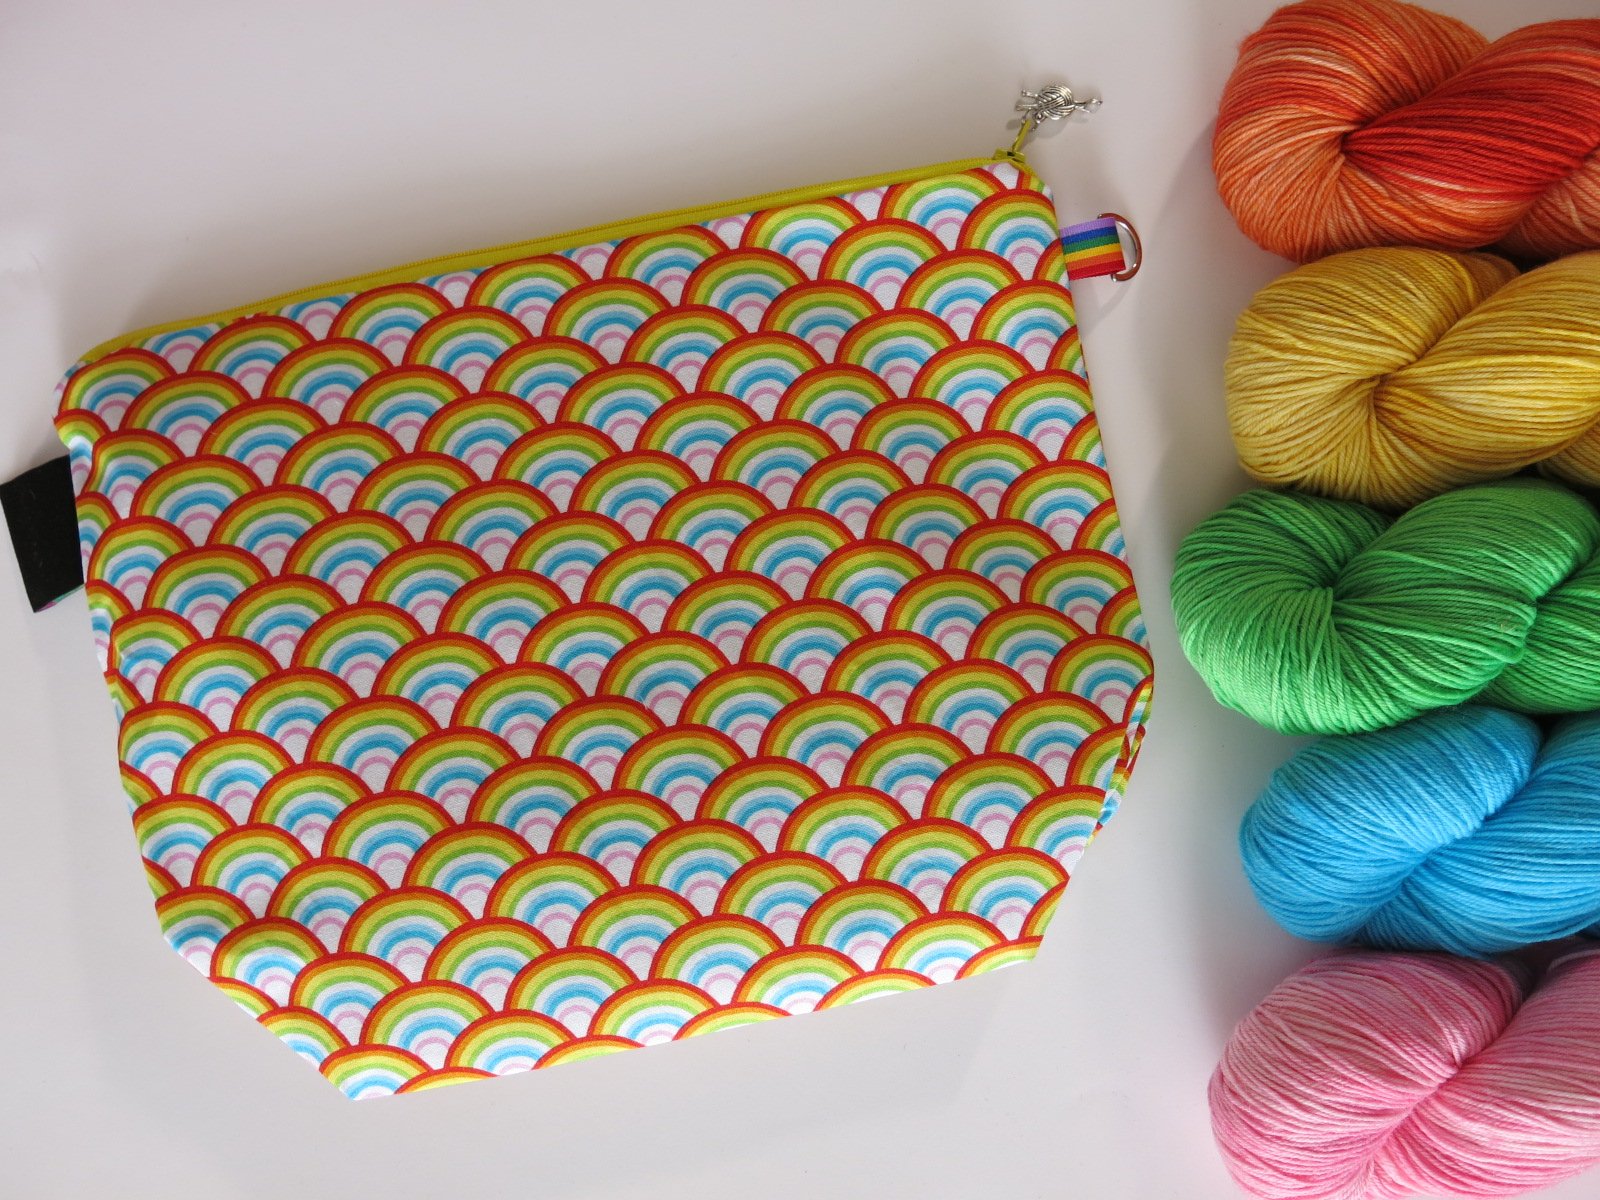 cotton zipper knitting project bags with a rainbow print